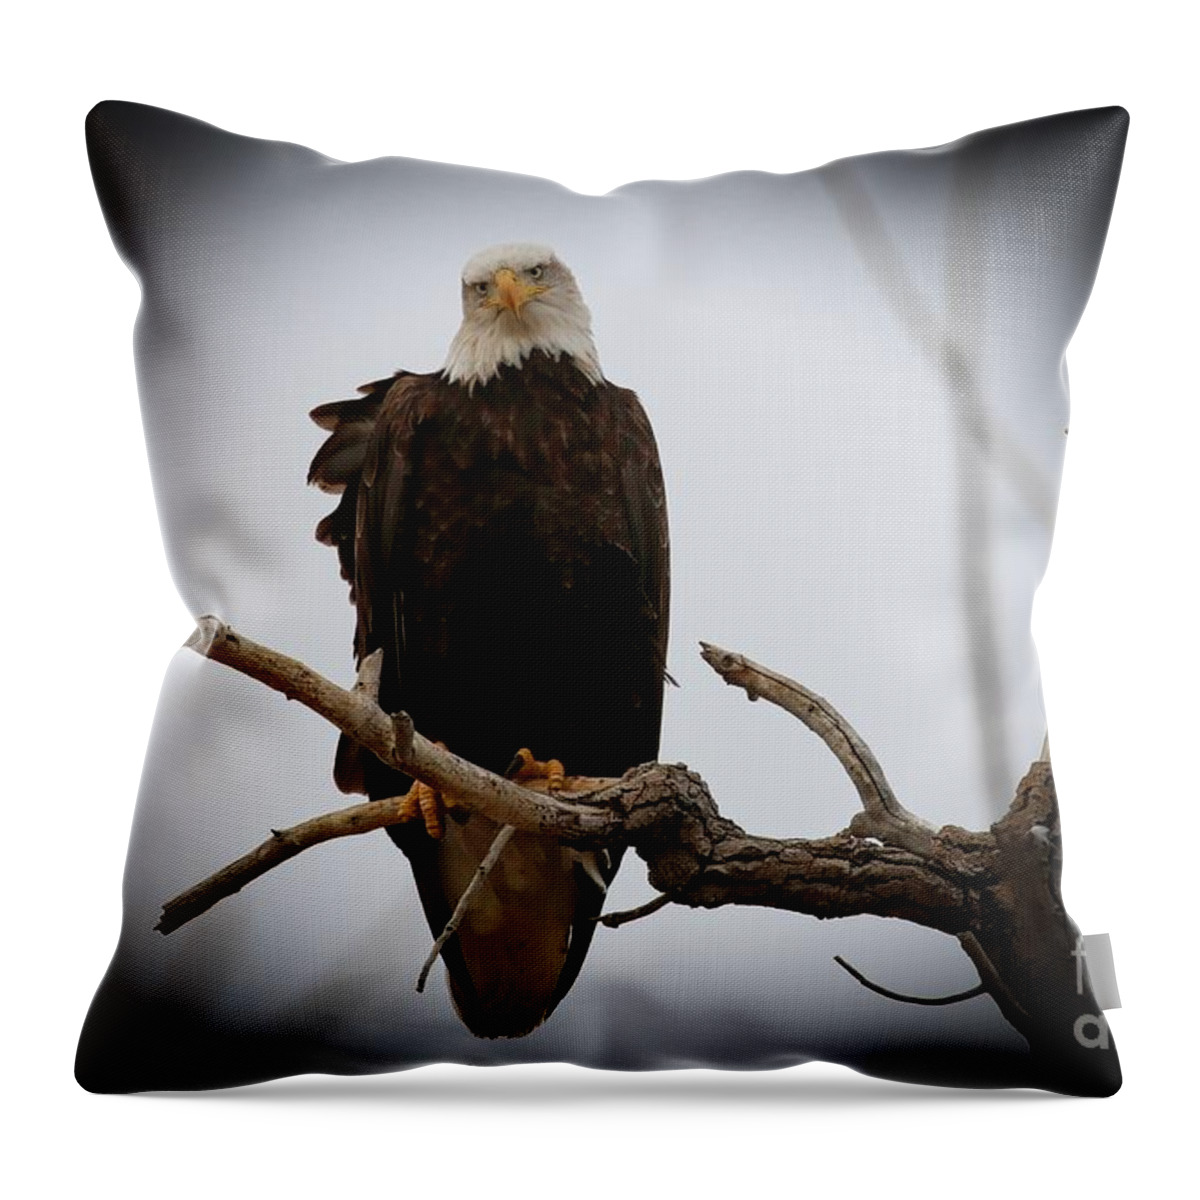 Eagles Throw Pillow featuring the photograph Contemplating by Veronica Batterson